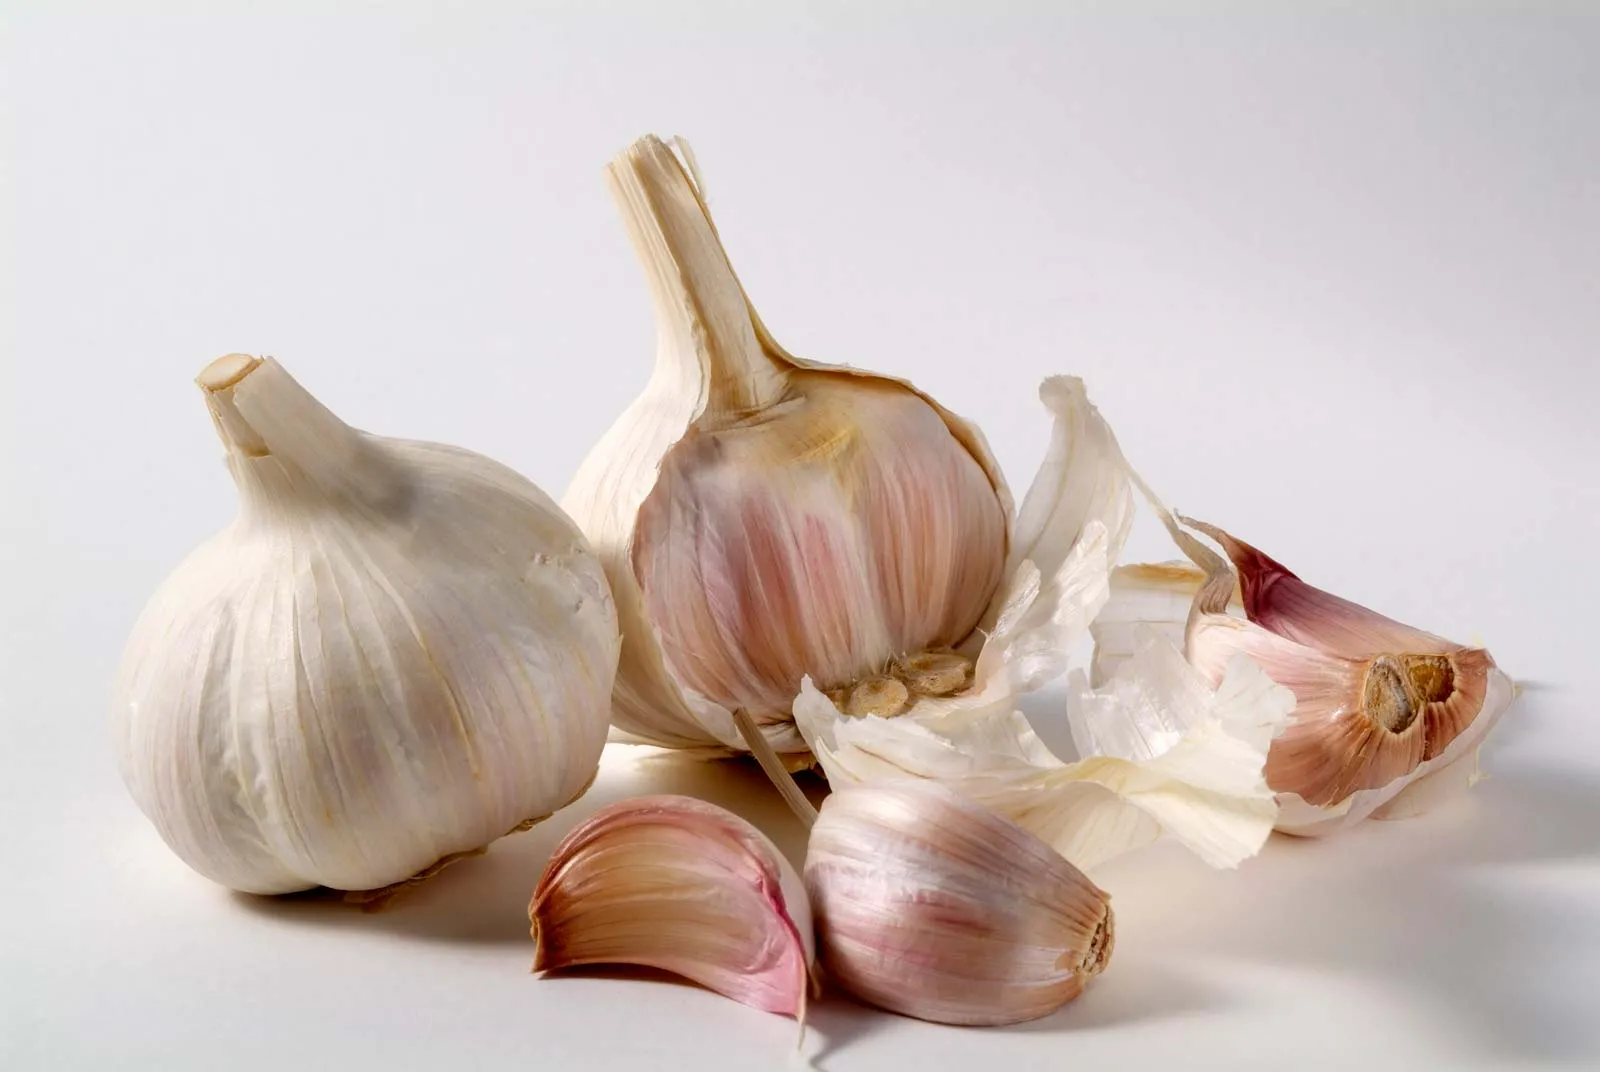 Can Garlic Improve Sexual Performance